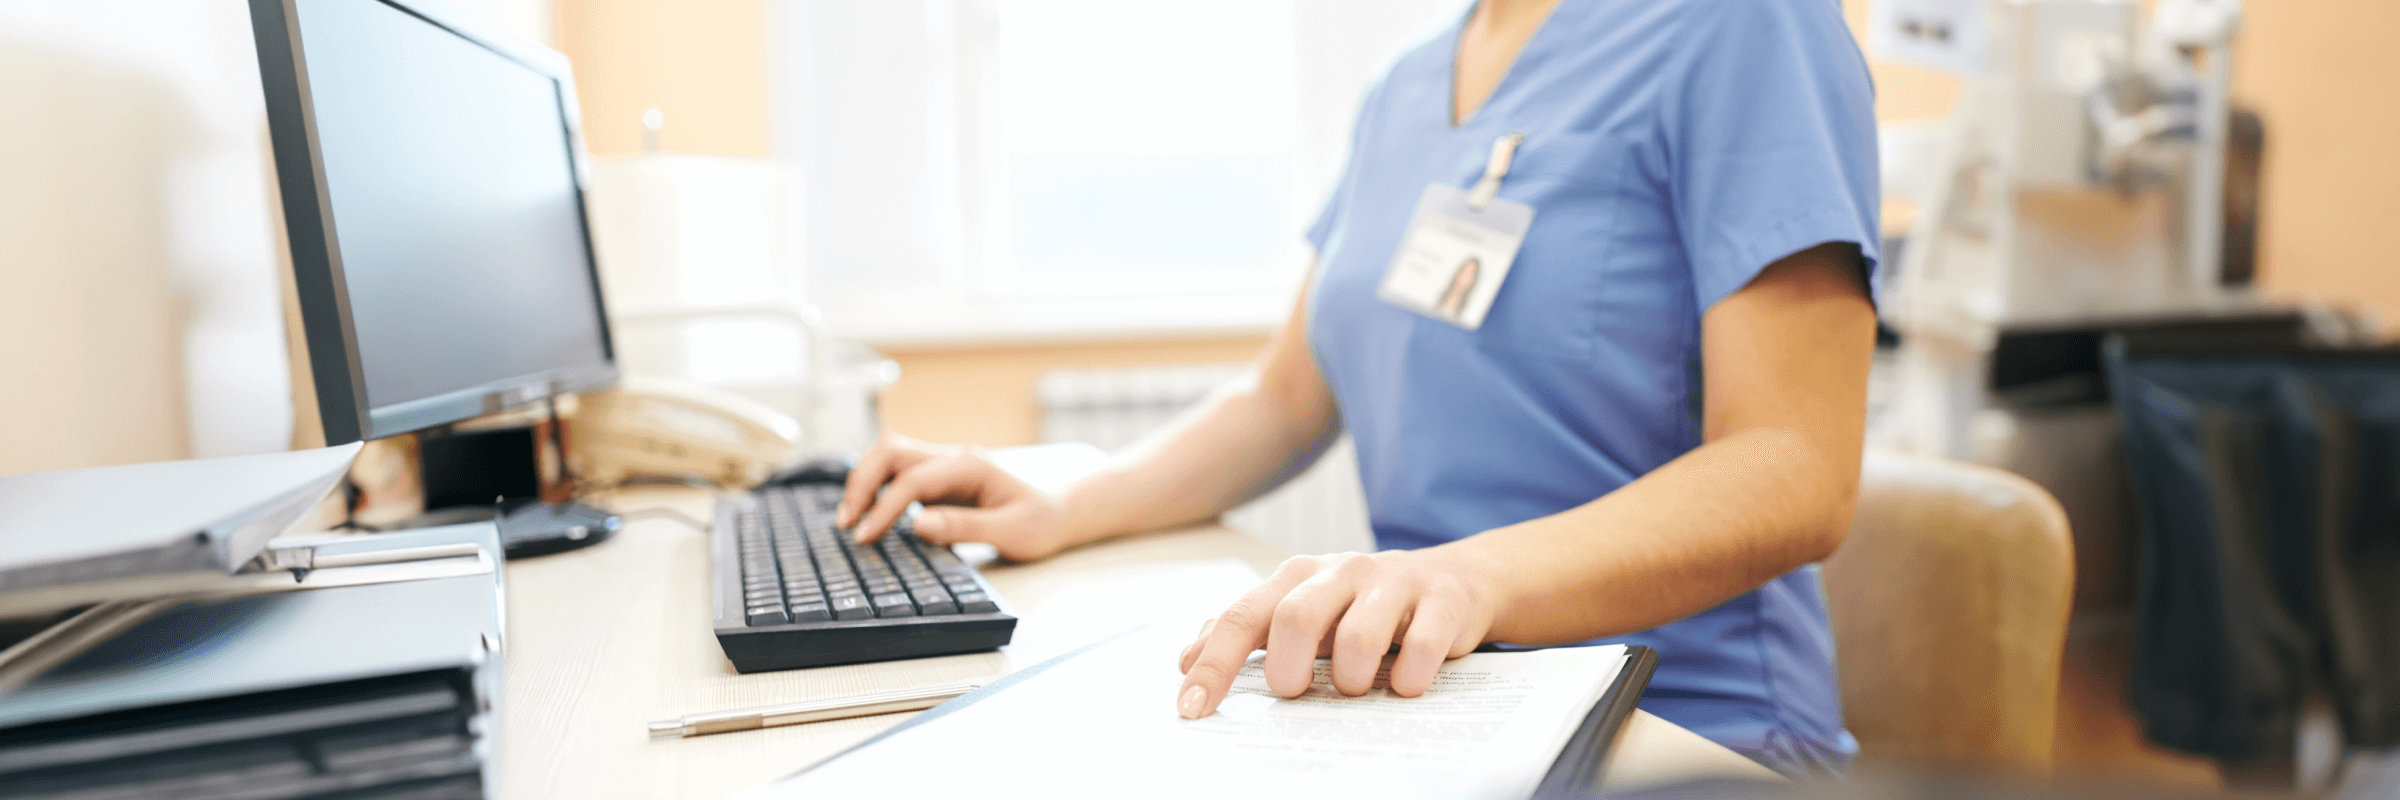 Nursing using computer and reading from notes 